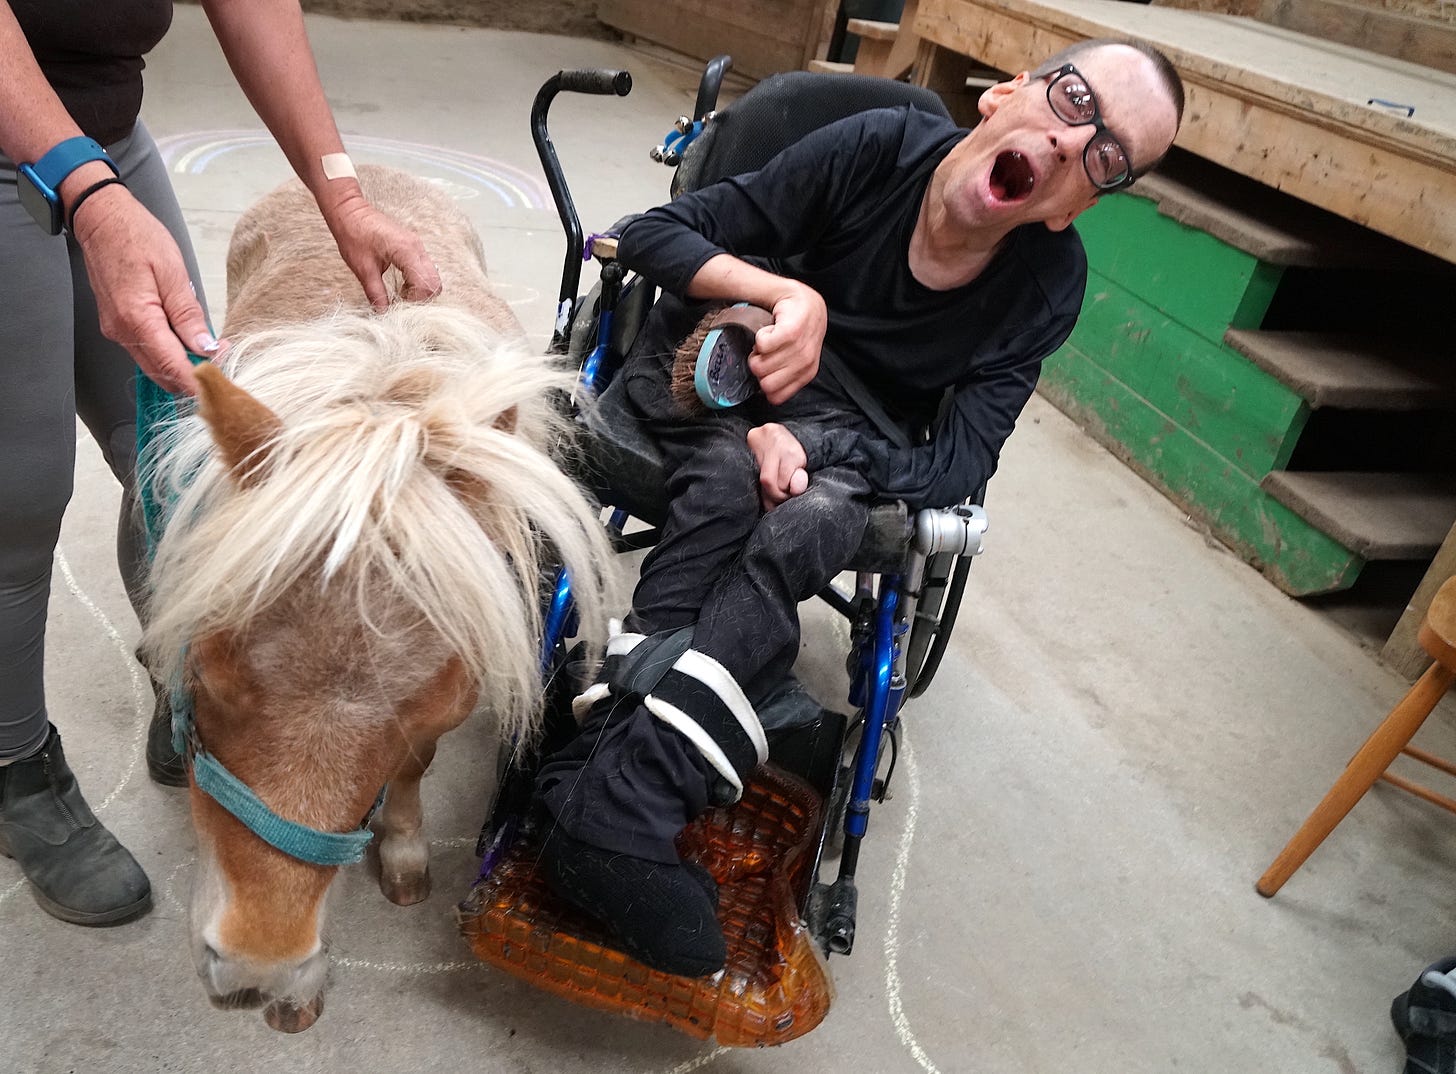 A man with a crew cut, wearing dark-colored clothing and dark-framed glasses, leans to the side in his wheelchair, his gap-toothed mouth opened widely. He holds a grooming brush in his contorted right hand as a miniature horse stands beside him.